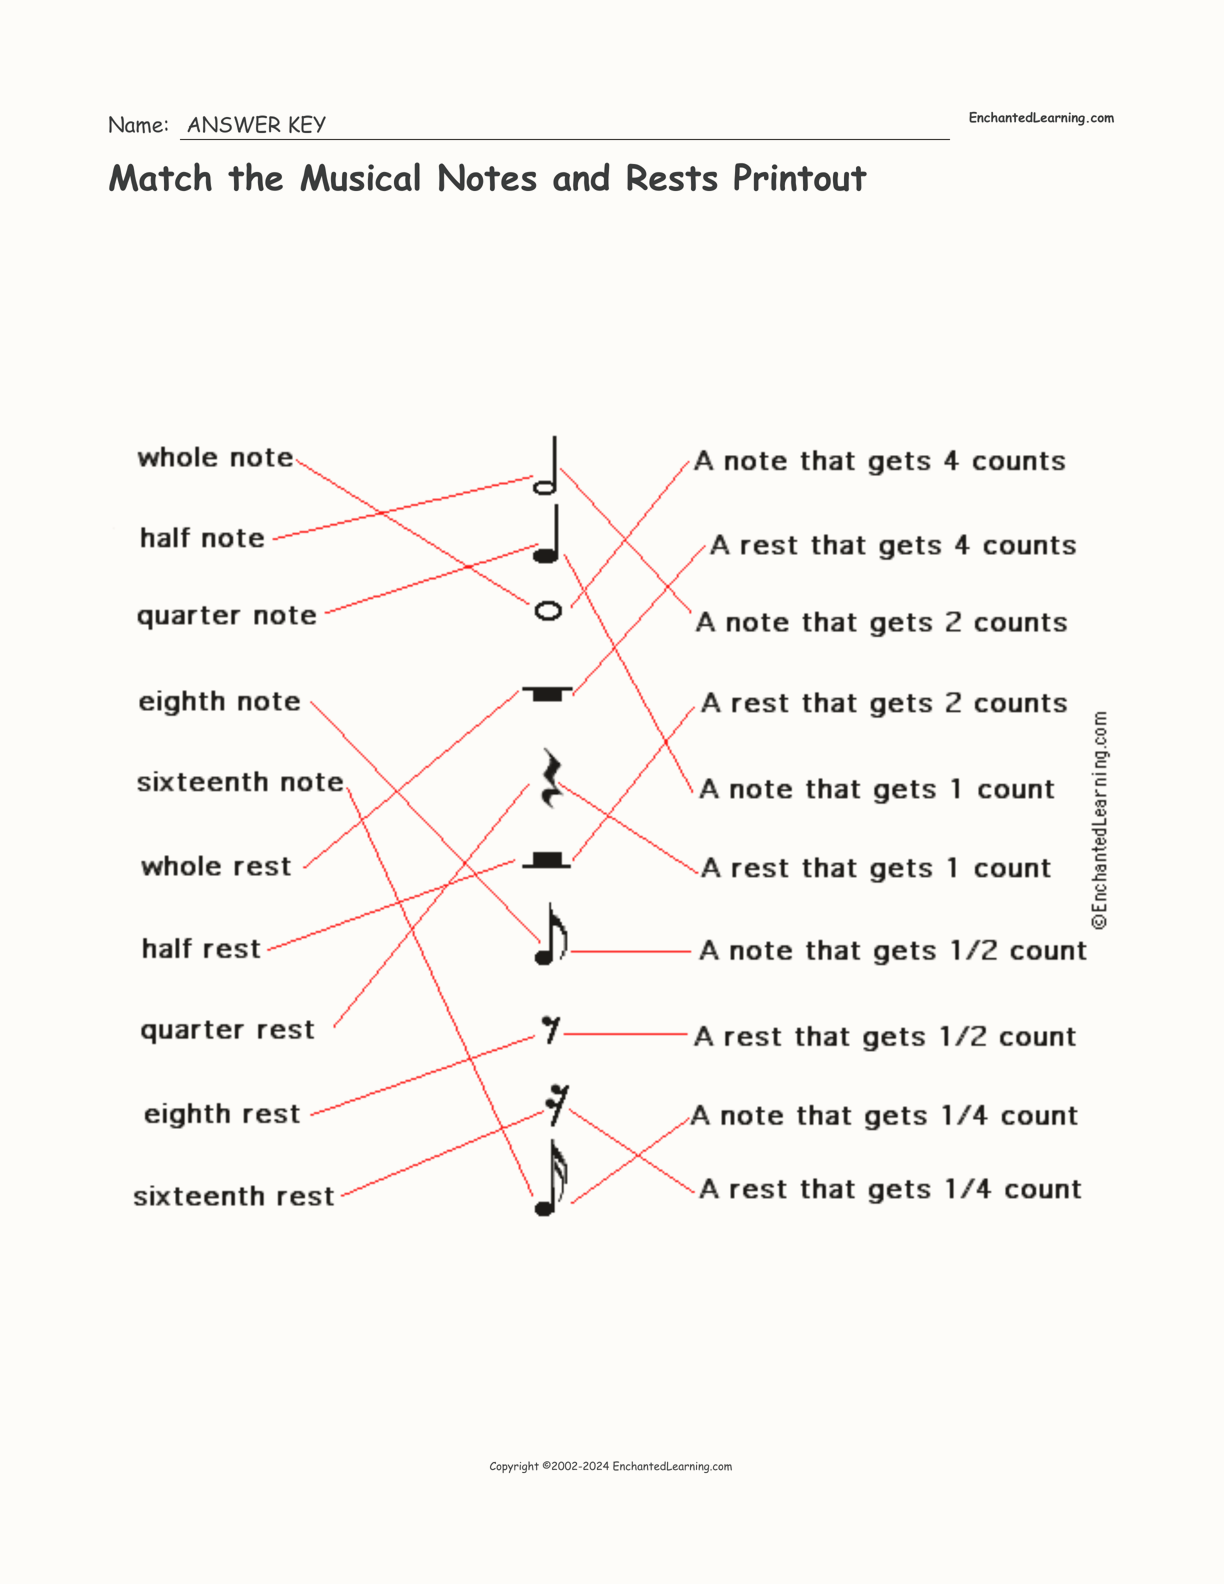 Match the Musical Notes and Rests Printout interactive worksheet page 2